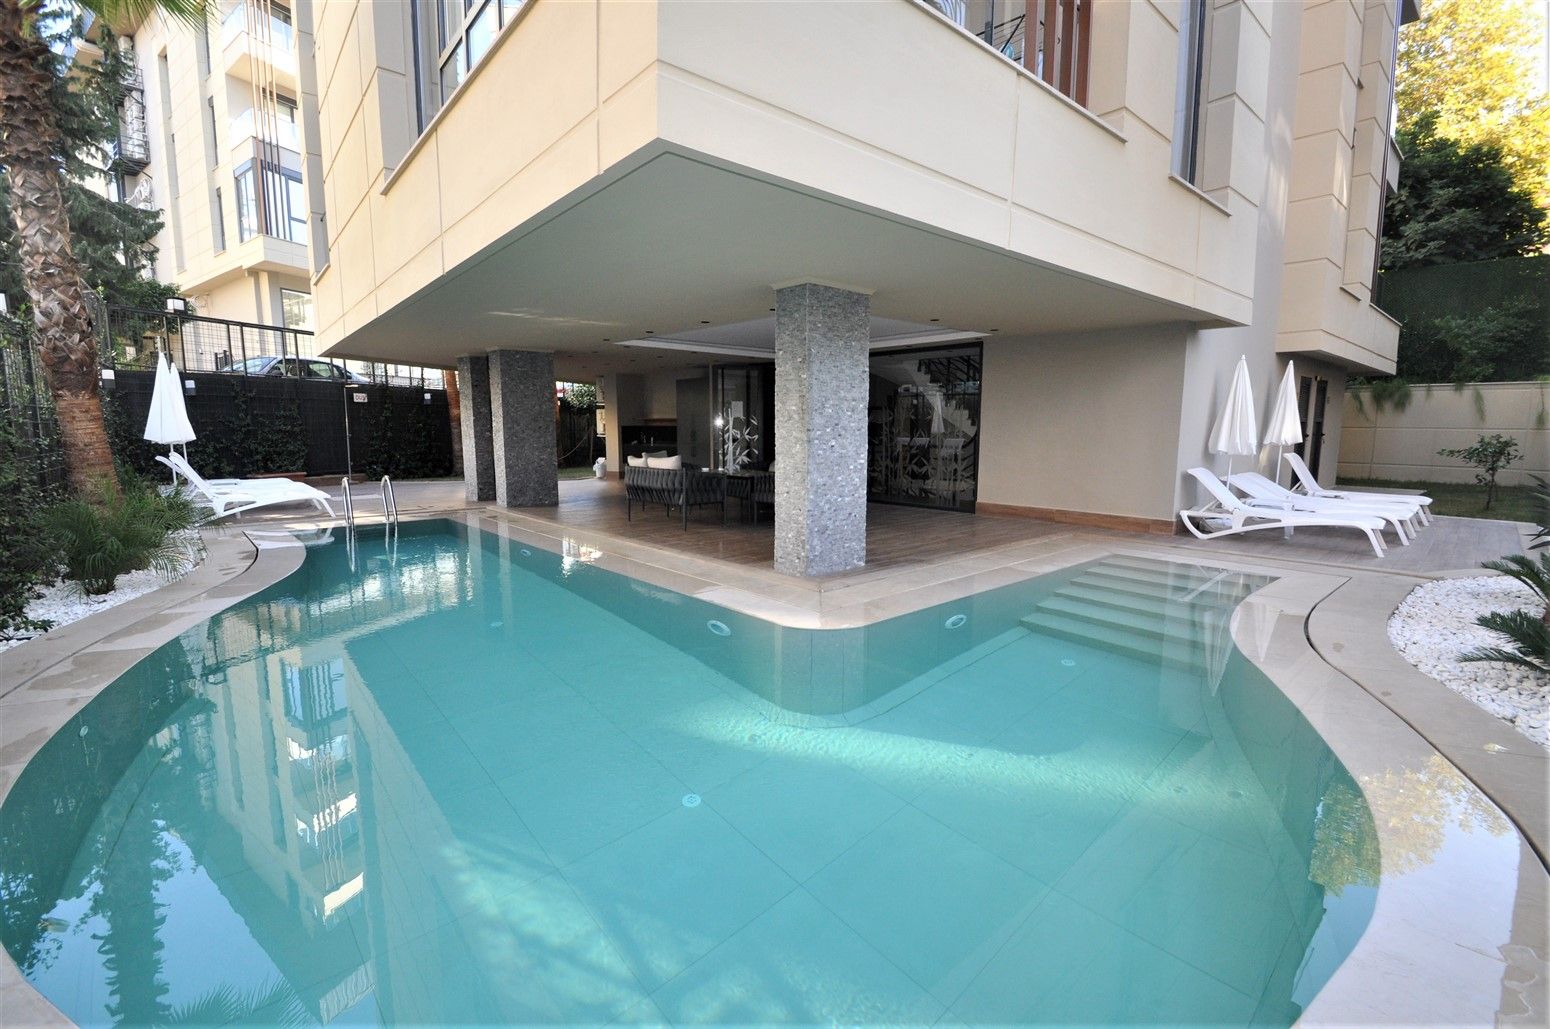 Furnished apartment in stylish residence, excellent location in the center